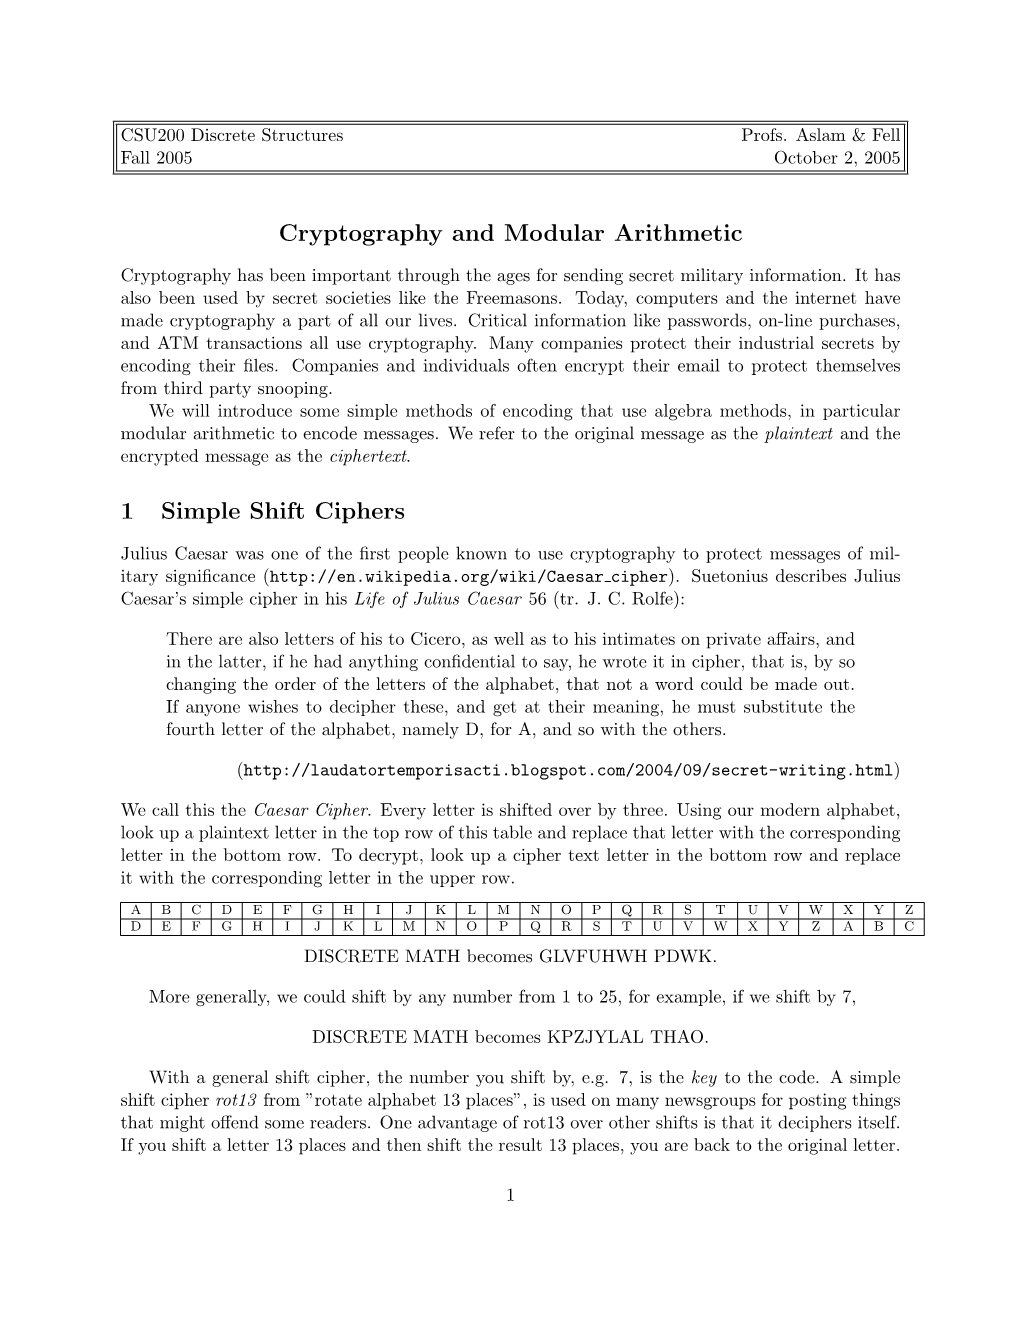 Cryptography and Modular Arithmetic 1 Simple Shift Ciphers